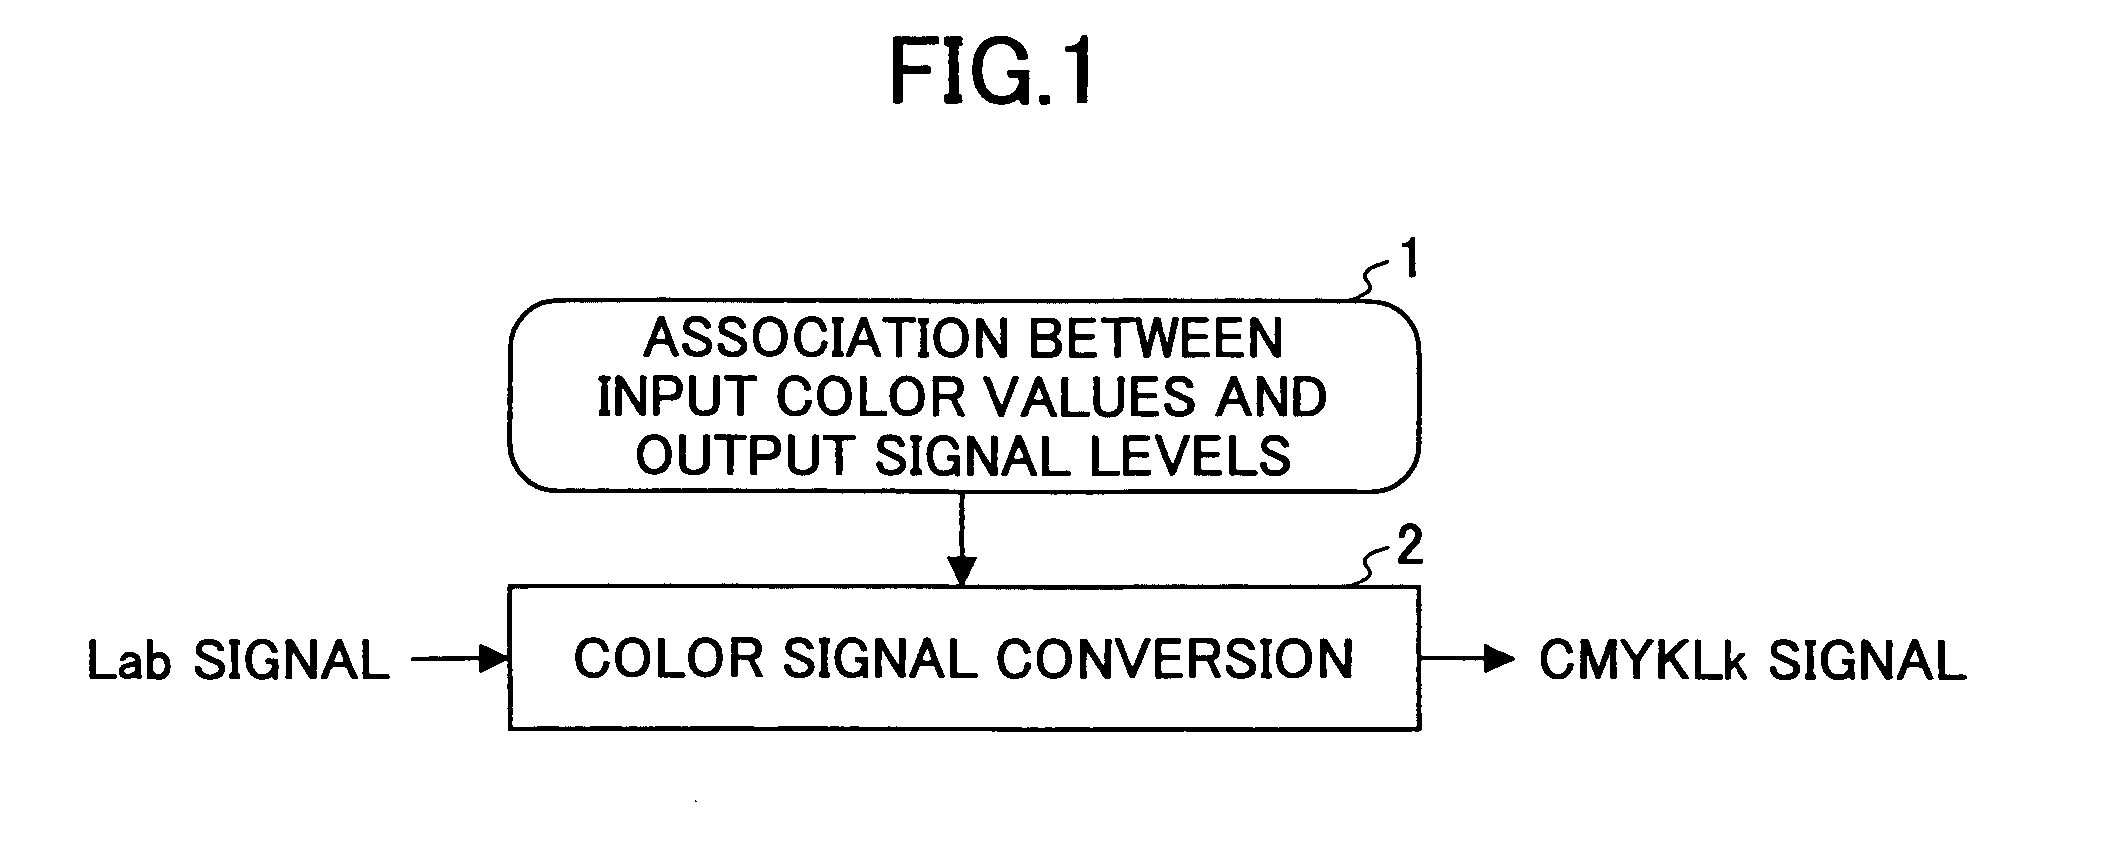 Color signal processing and color profile creation for color image reproduction